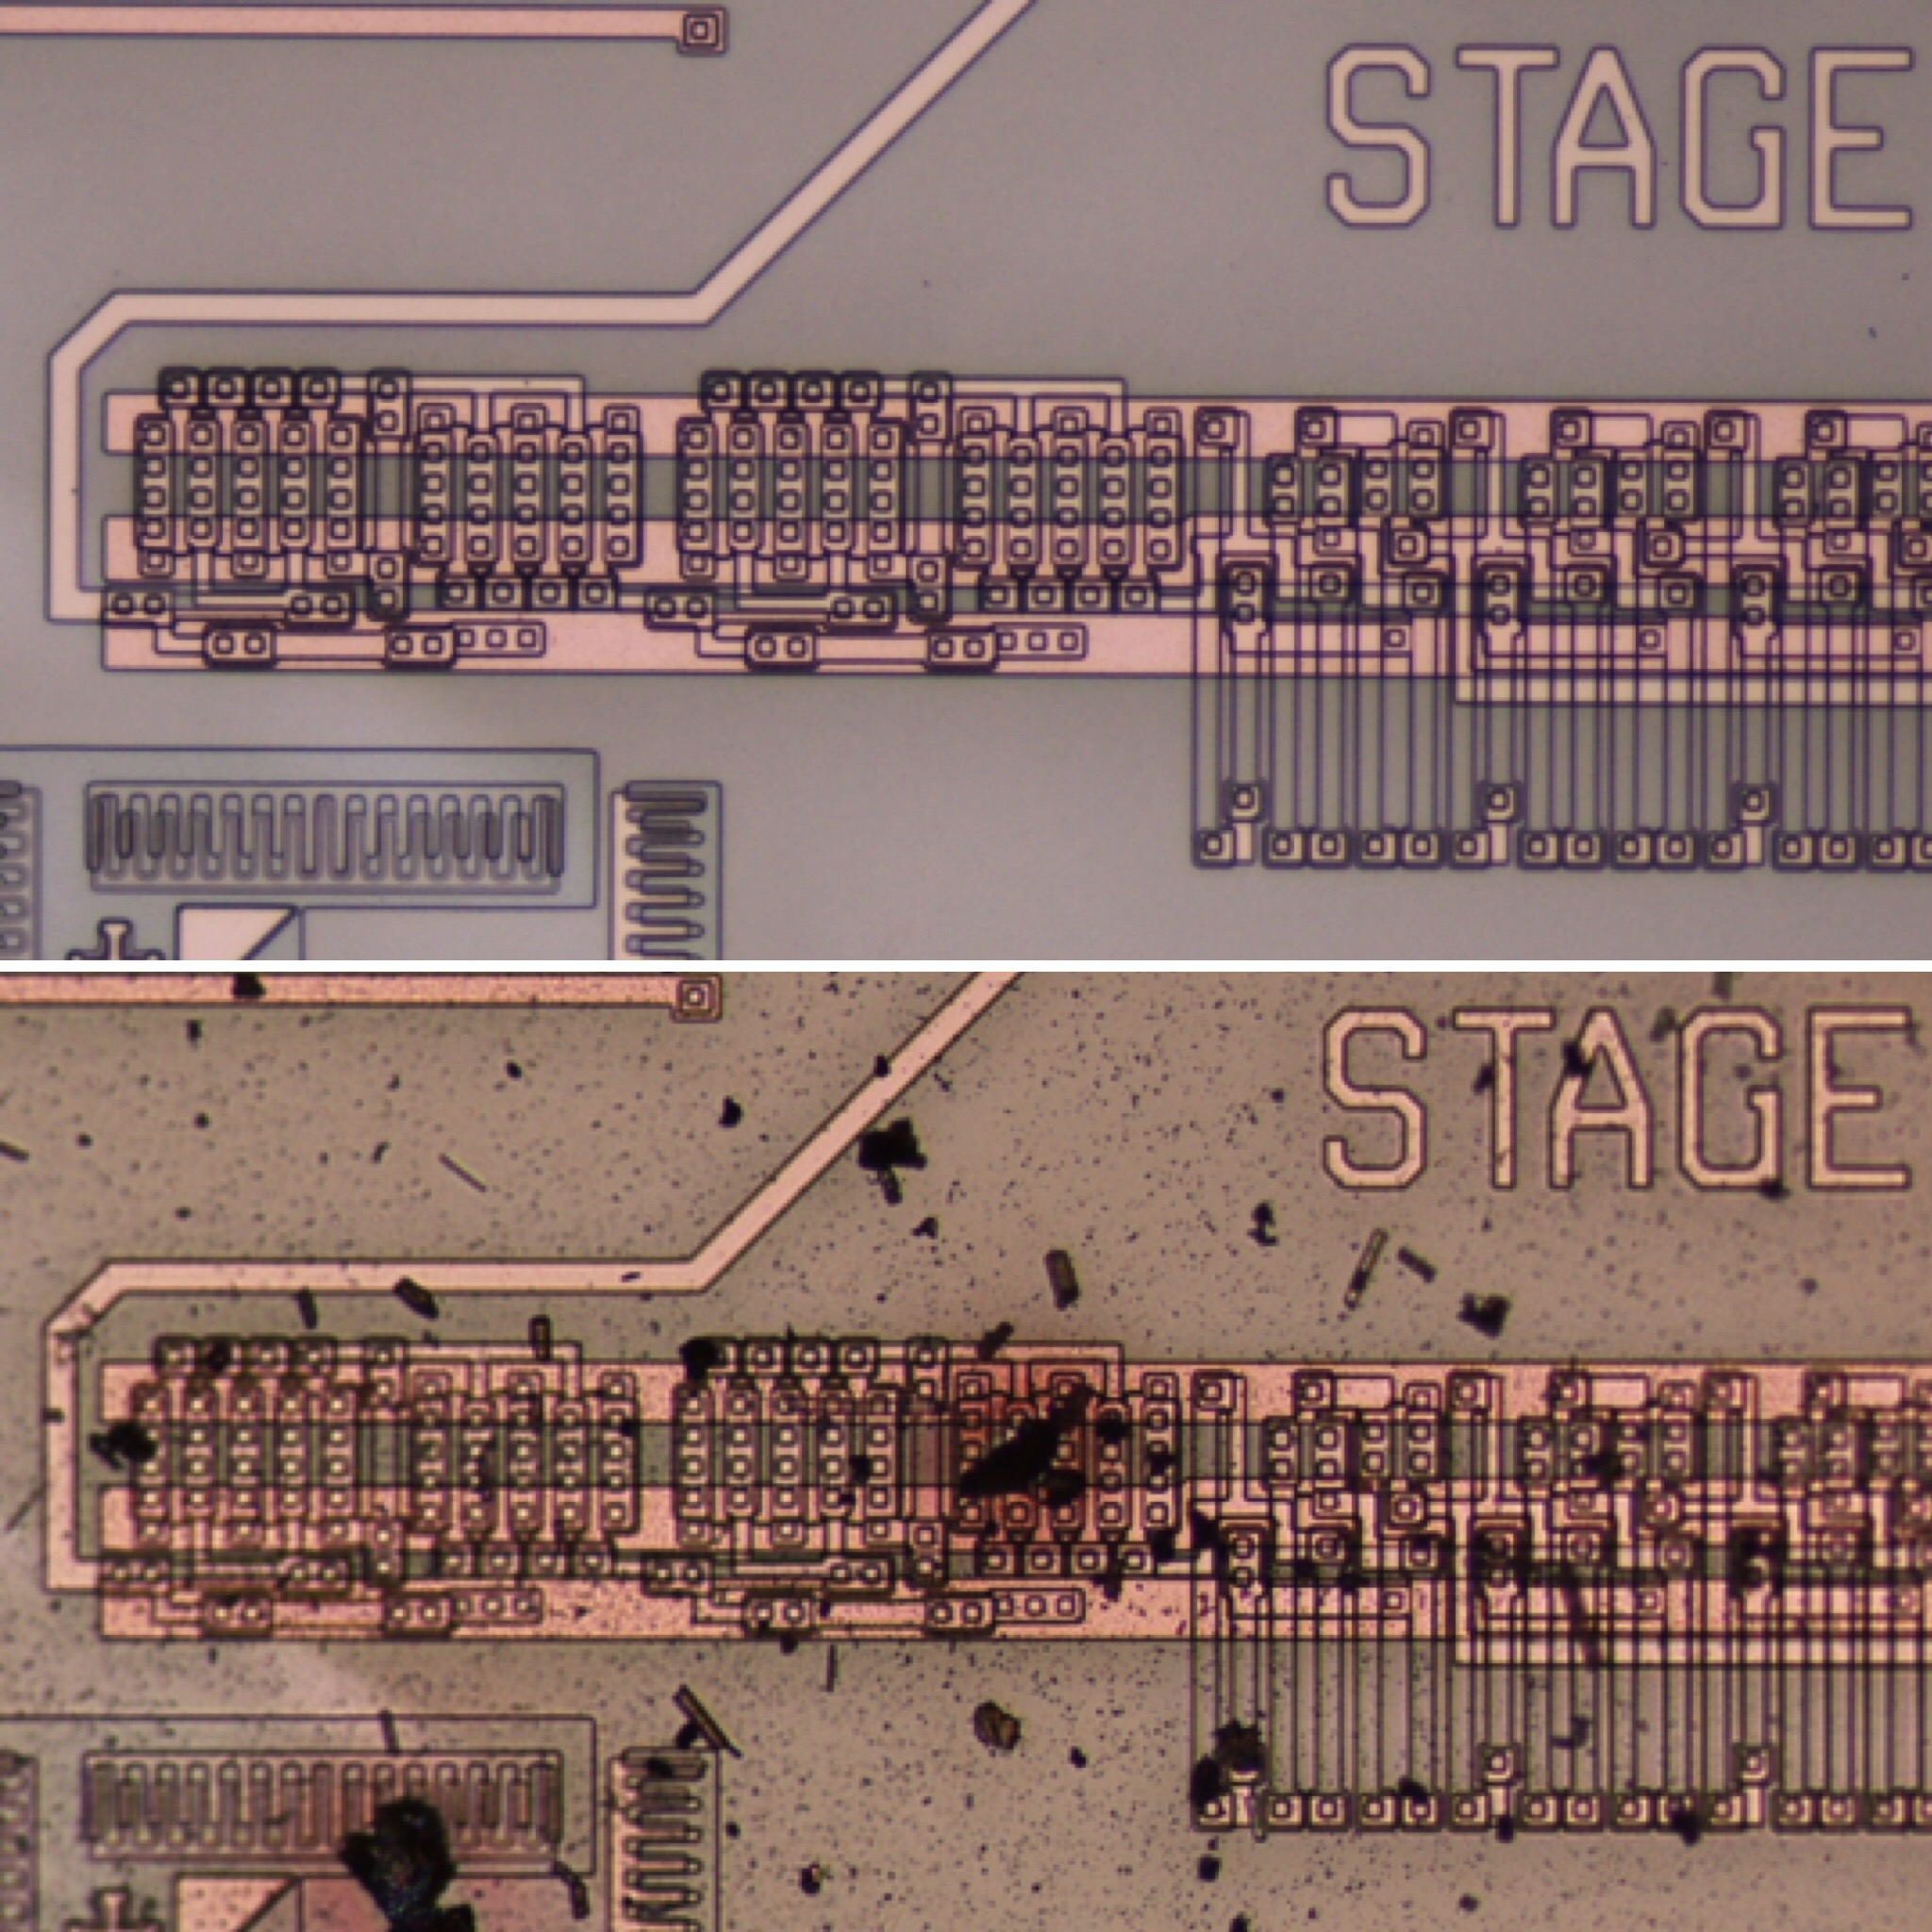 Images of integrated circuit before and after testing.